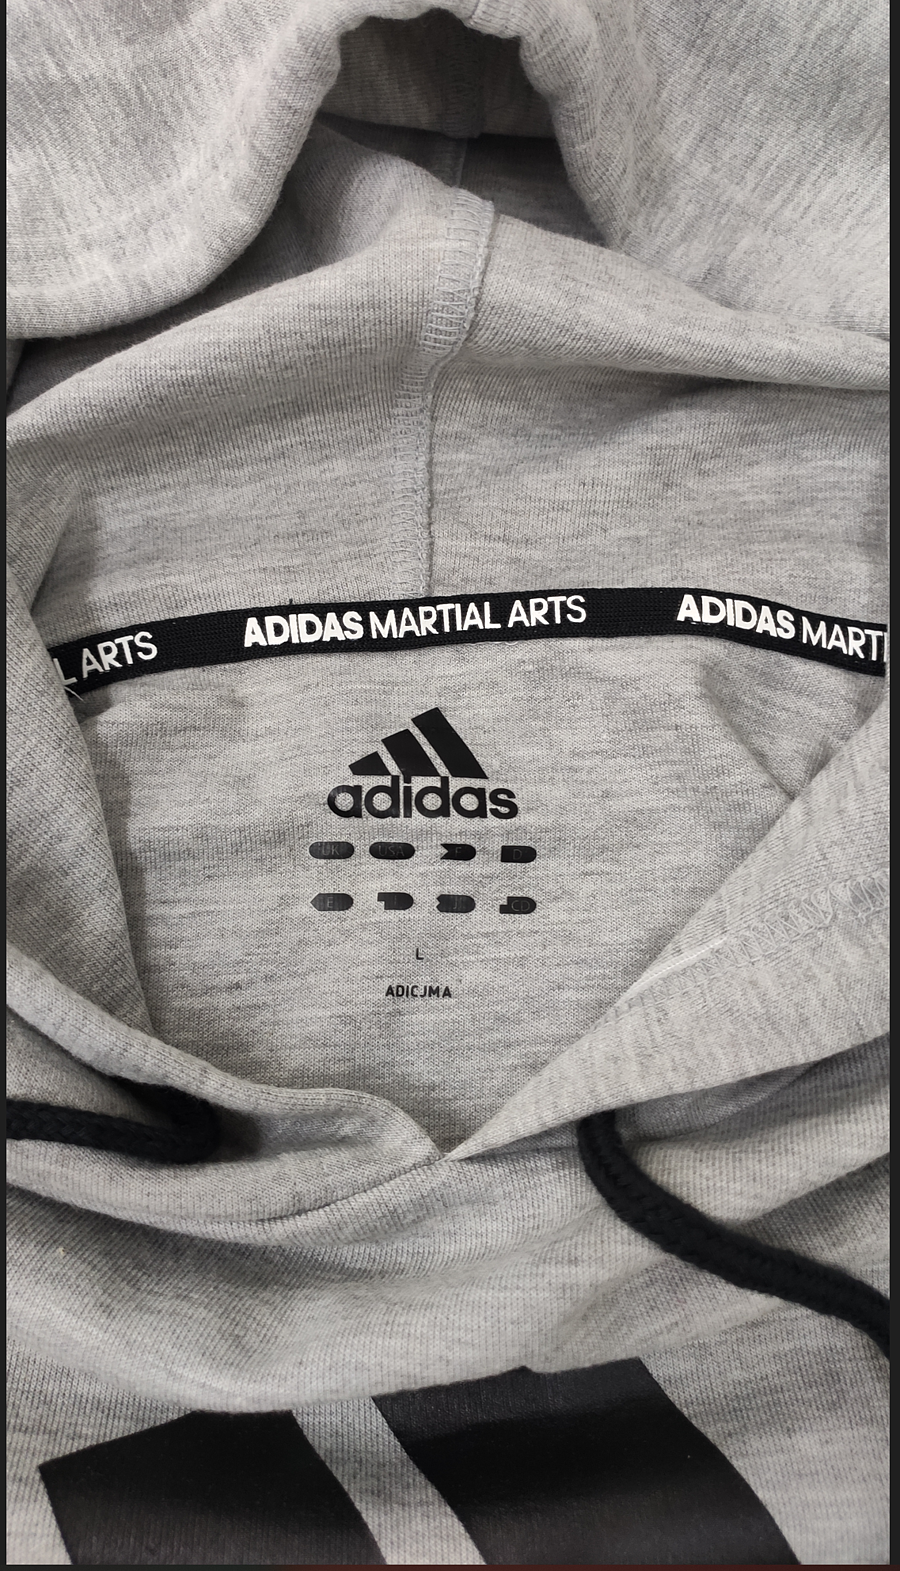 SPECIAL OFFER Adidas hoodie for couple models  Size：M #530891 replica